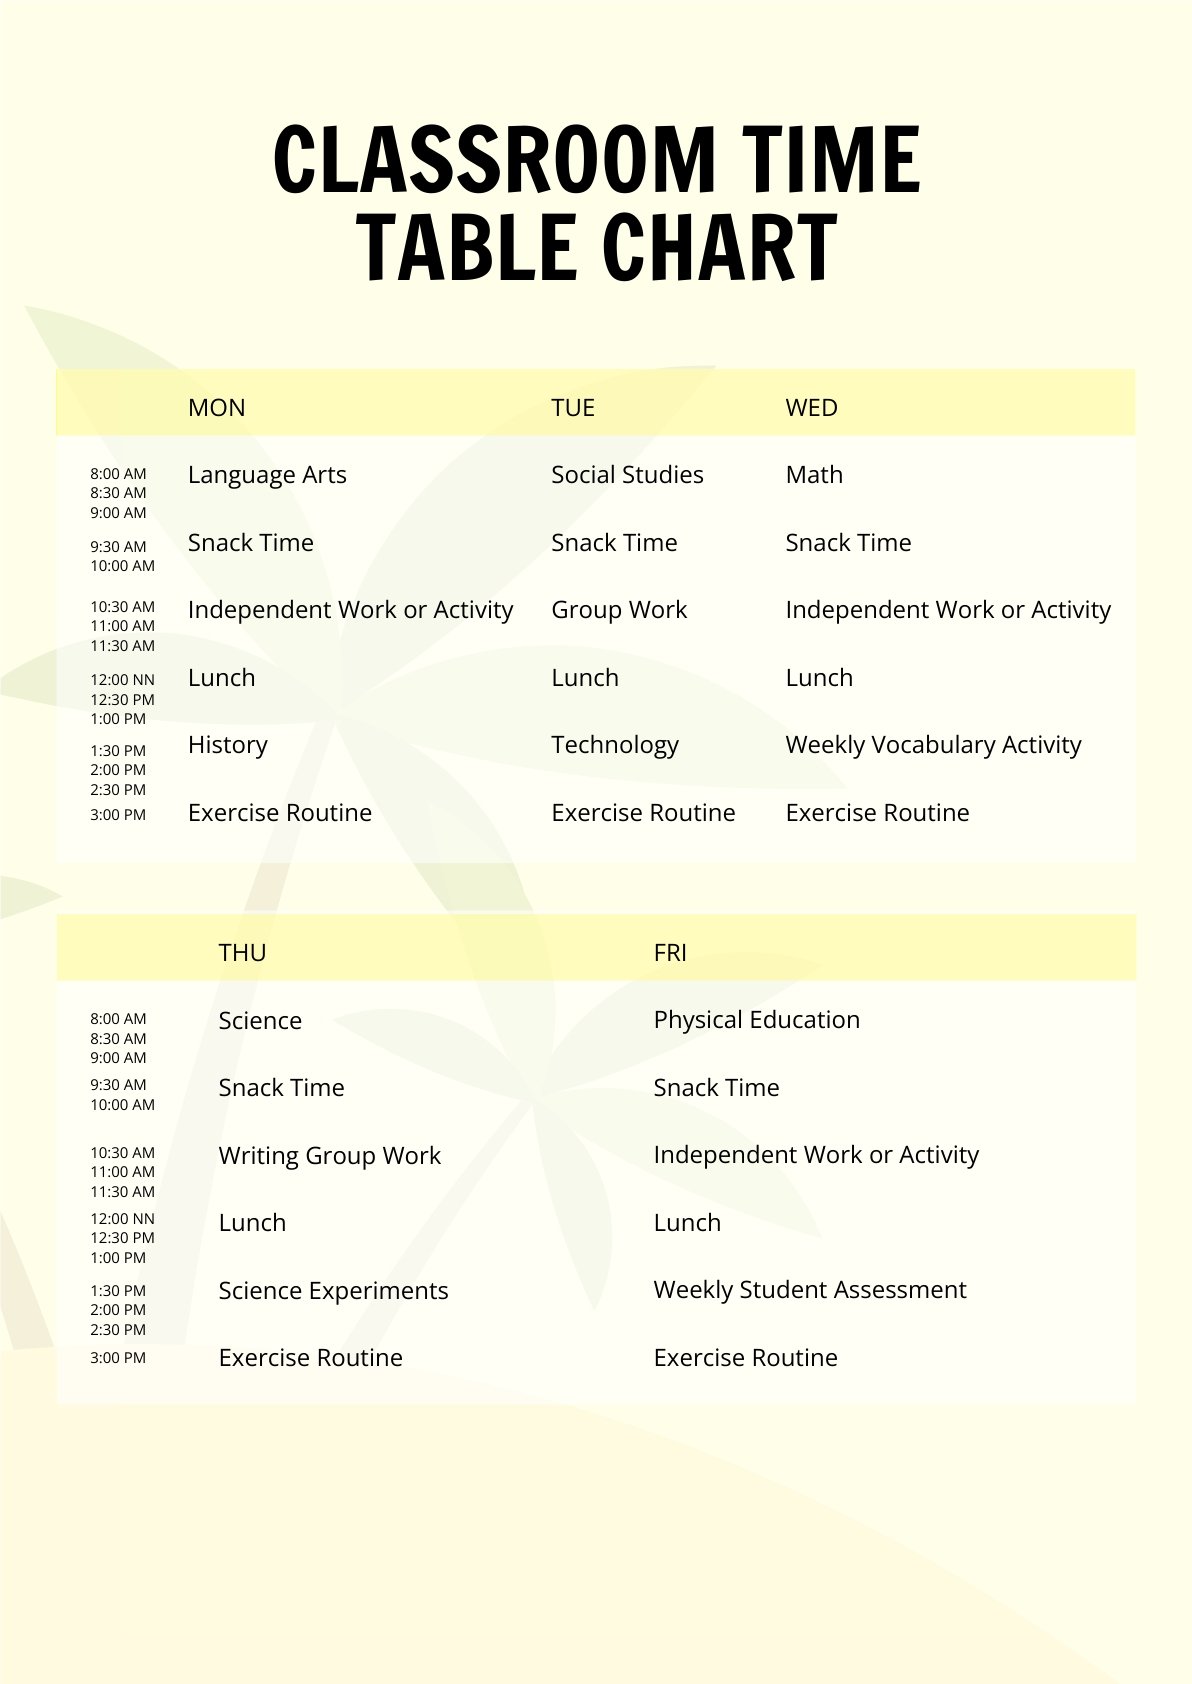 Free Classroom Time Table Chart Template in PDF